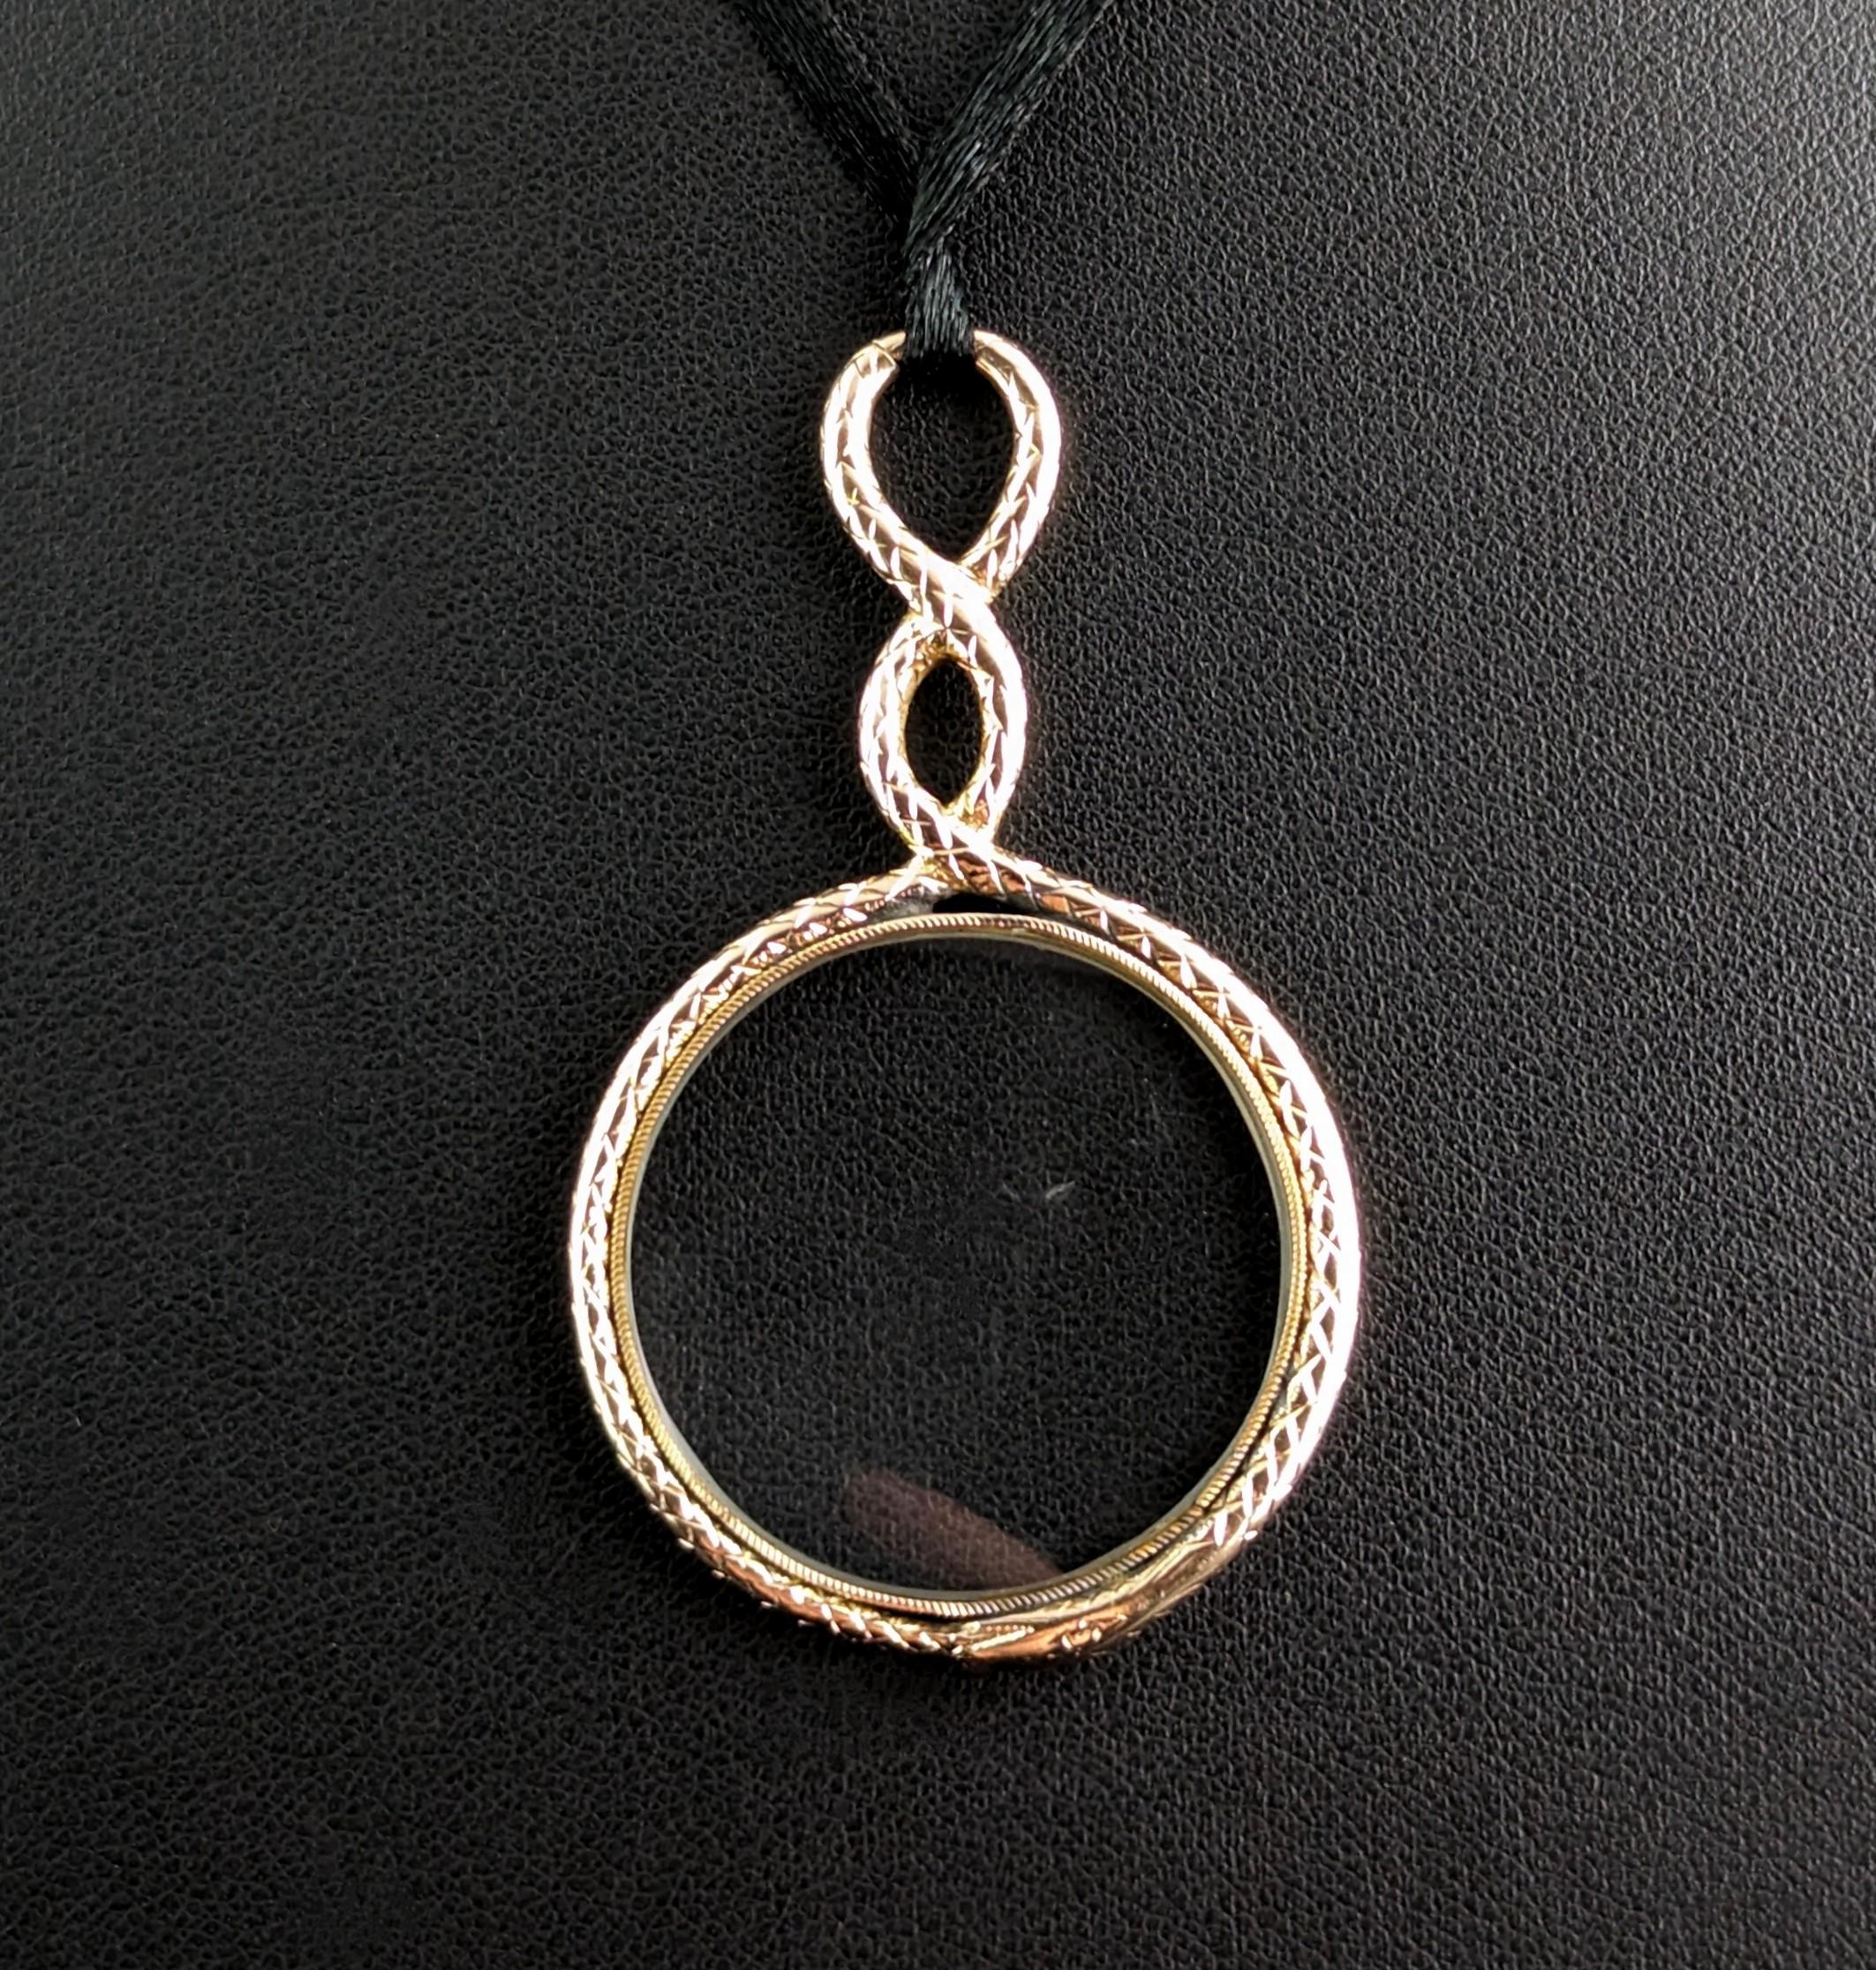 There is nothing not to love about this stunning antique, Georgian era ouroboros gold quizzing glass pendant!

Usually worn around the neck on a ribbon or chain for ease of use, these beautiful decorative pieces really were a functional piece of